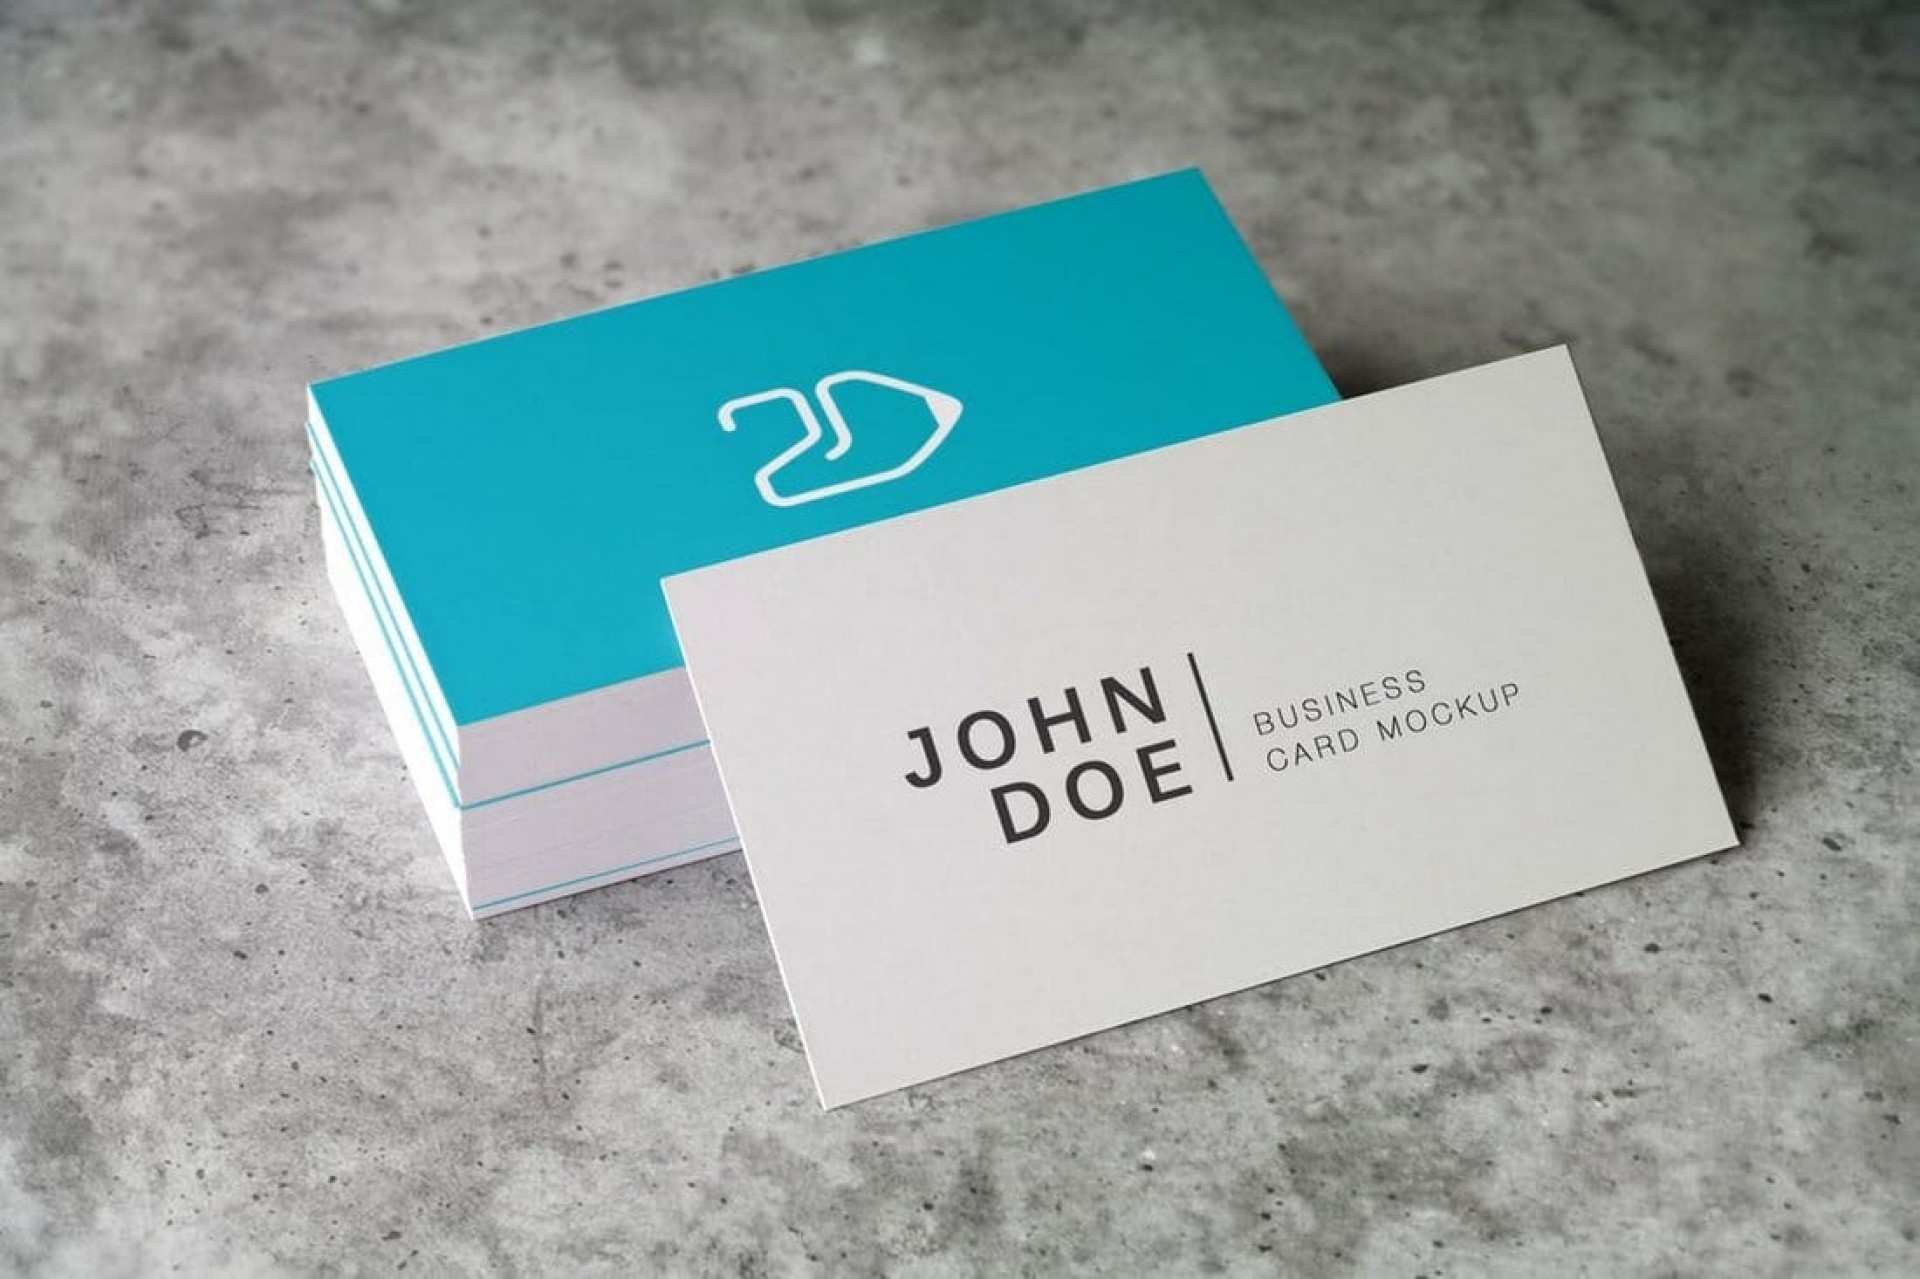 Download 38 Report Business Card Mockup Template Free Download In Photoshop With Business Card Mockup Template Free Download Cards Design Templates